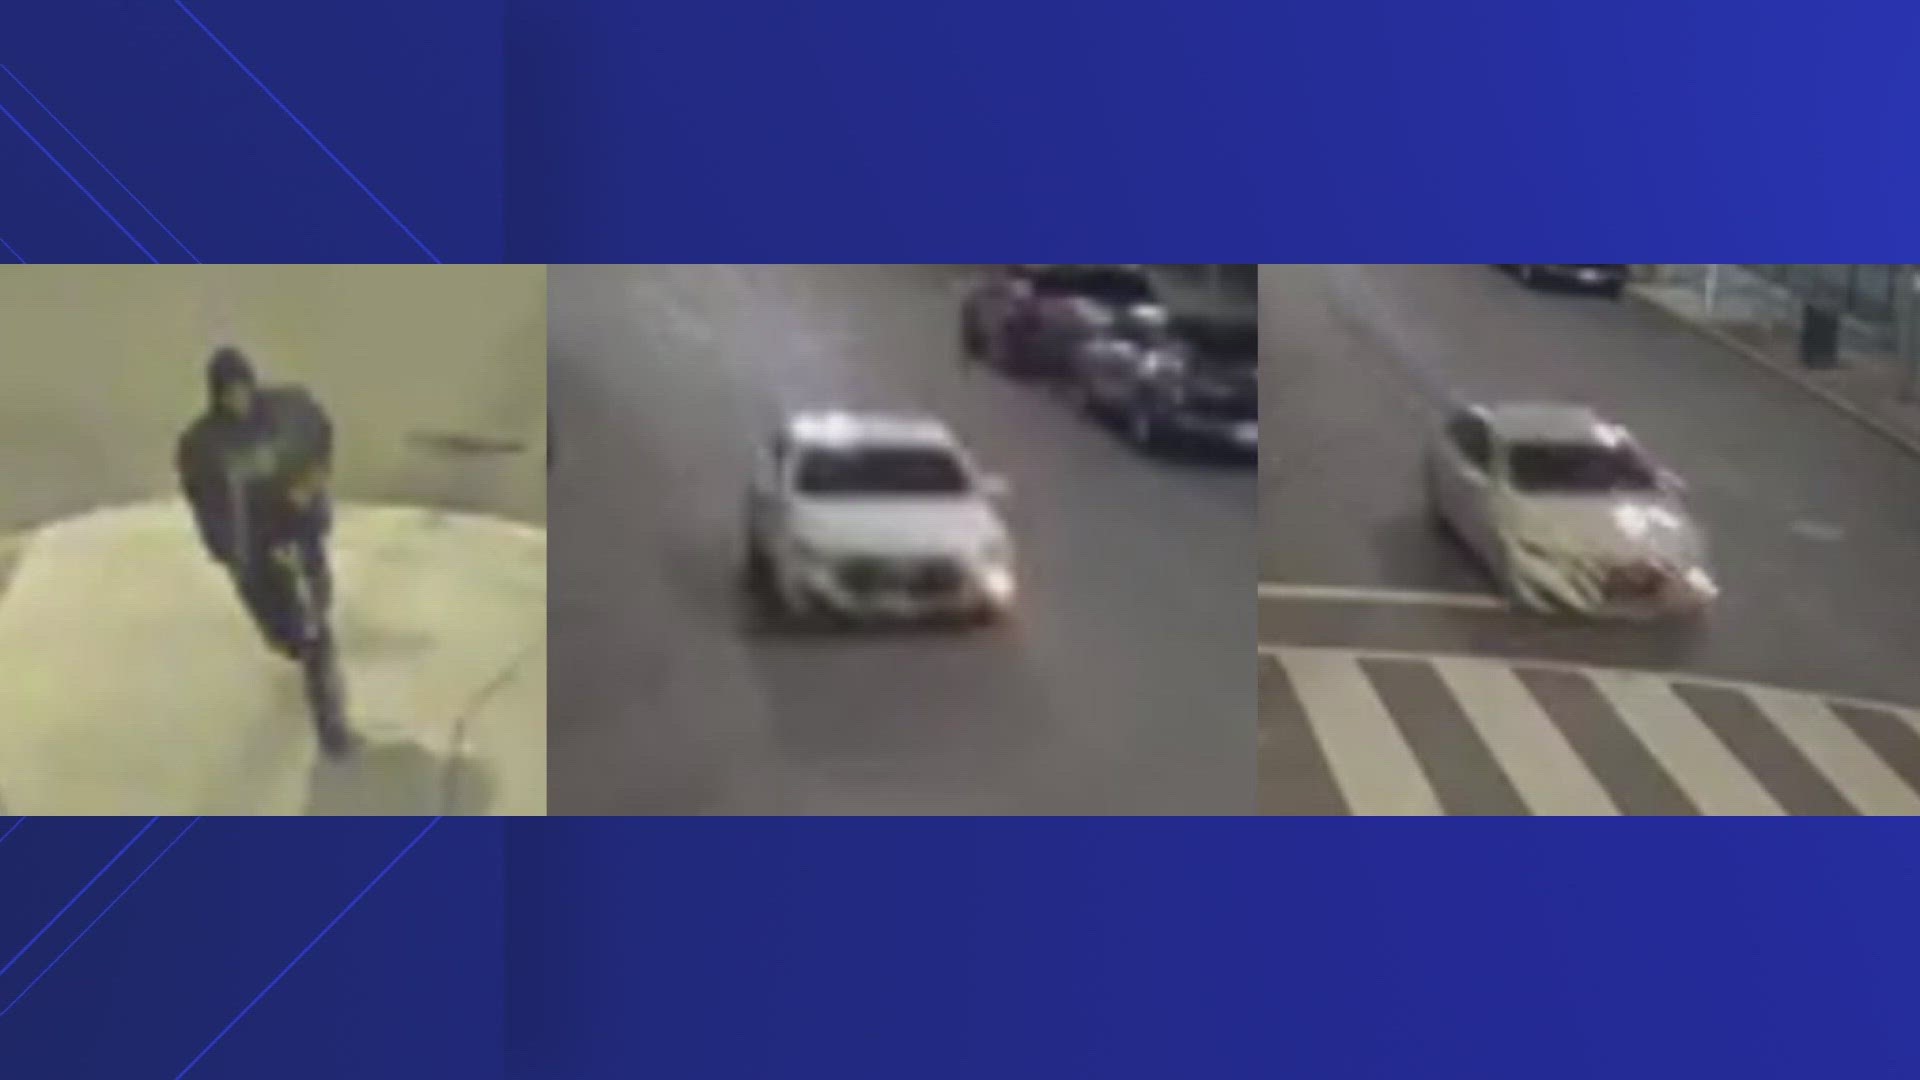 Investigators say a suspect and their car was captured by nearby surveillance cameras.